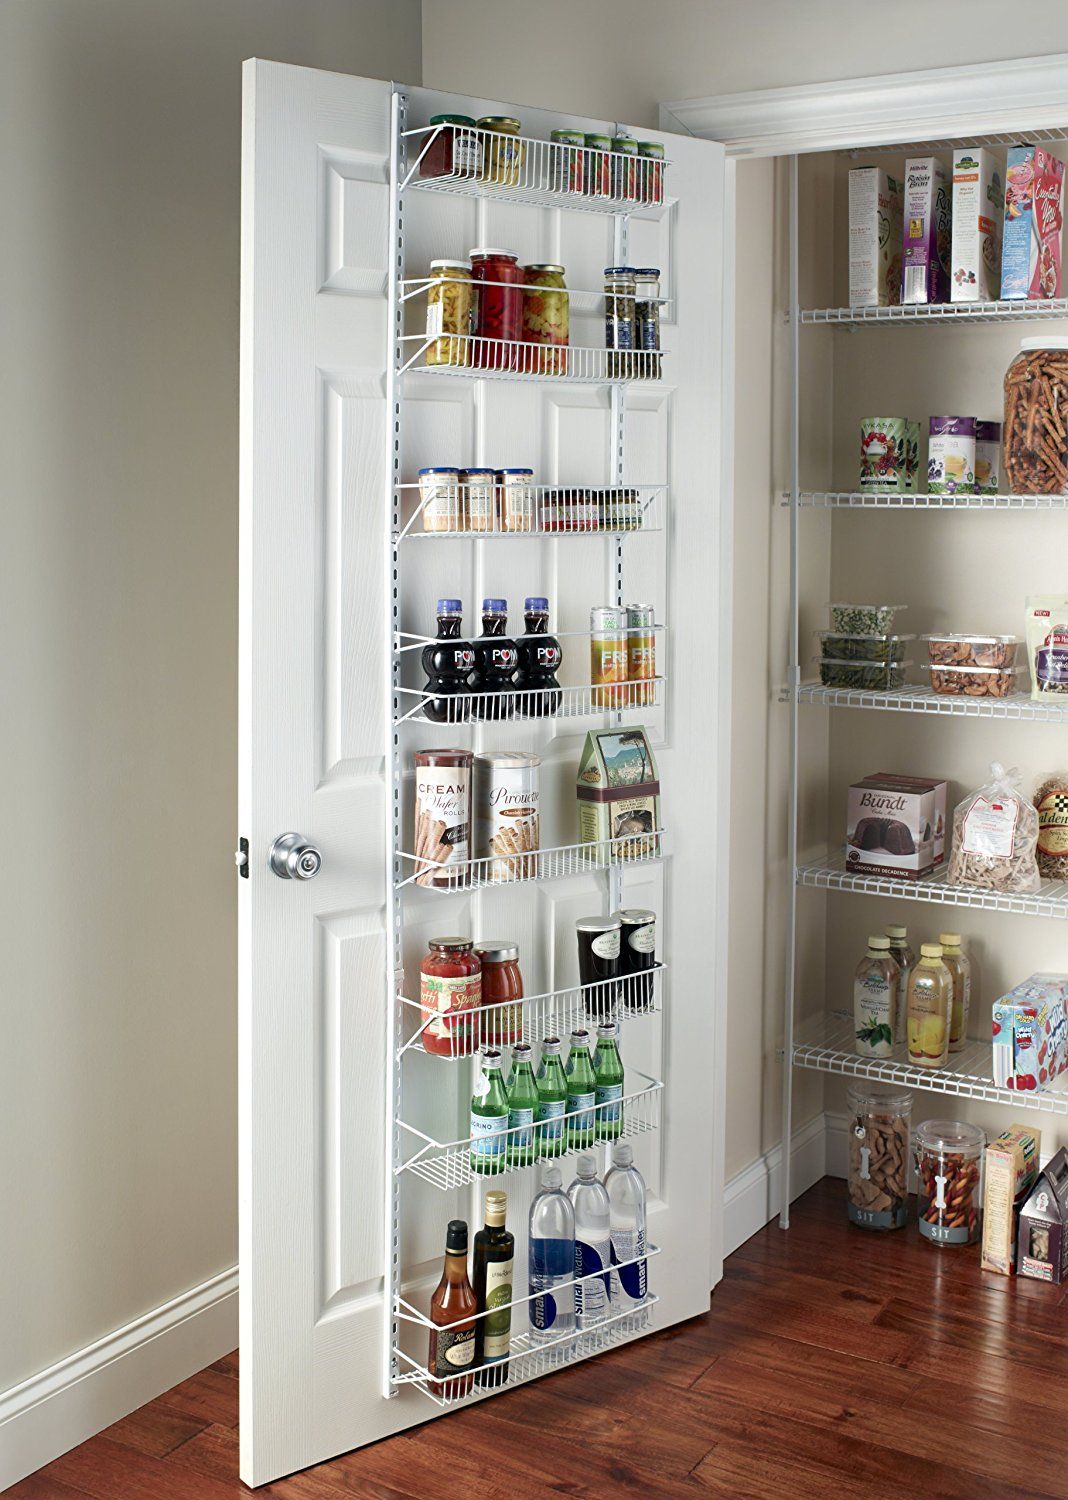 Even doors offer extra storage. Source: Mom Shopping Network